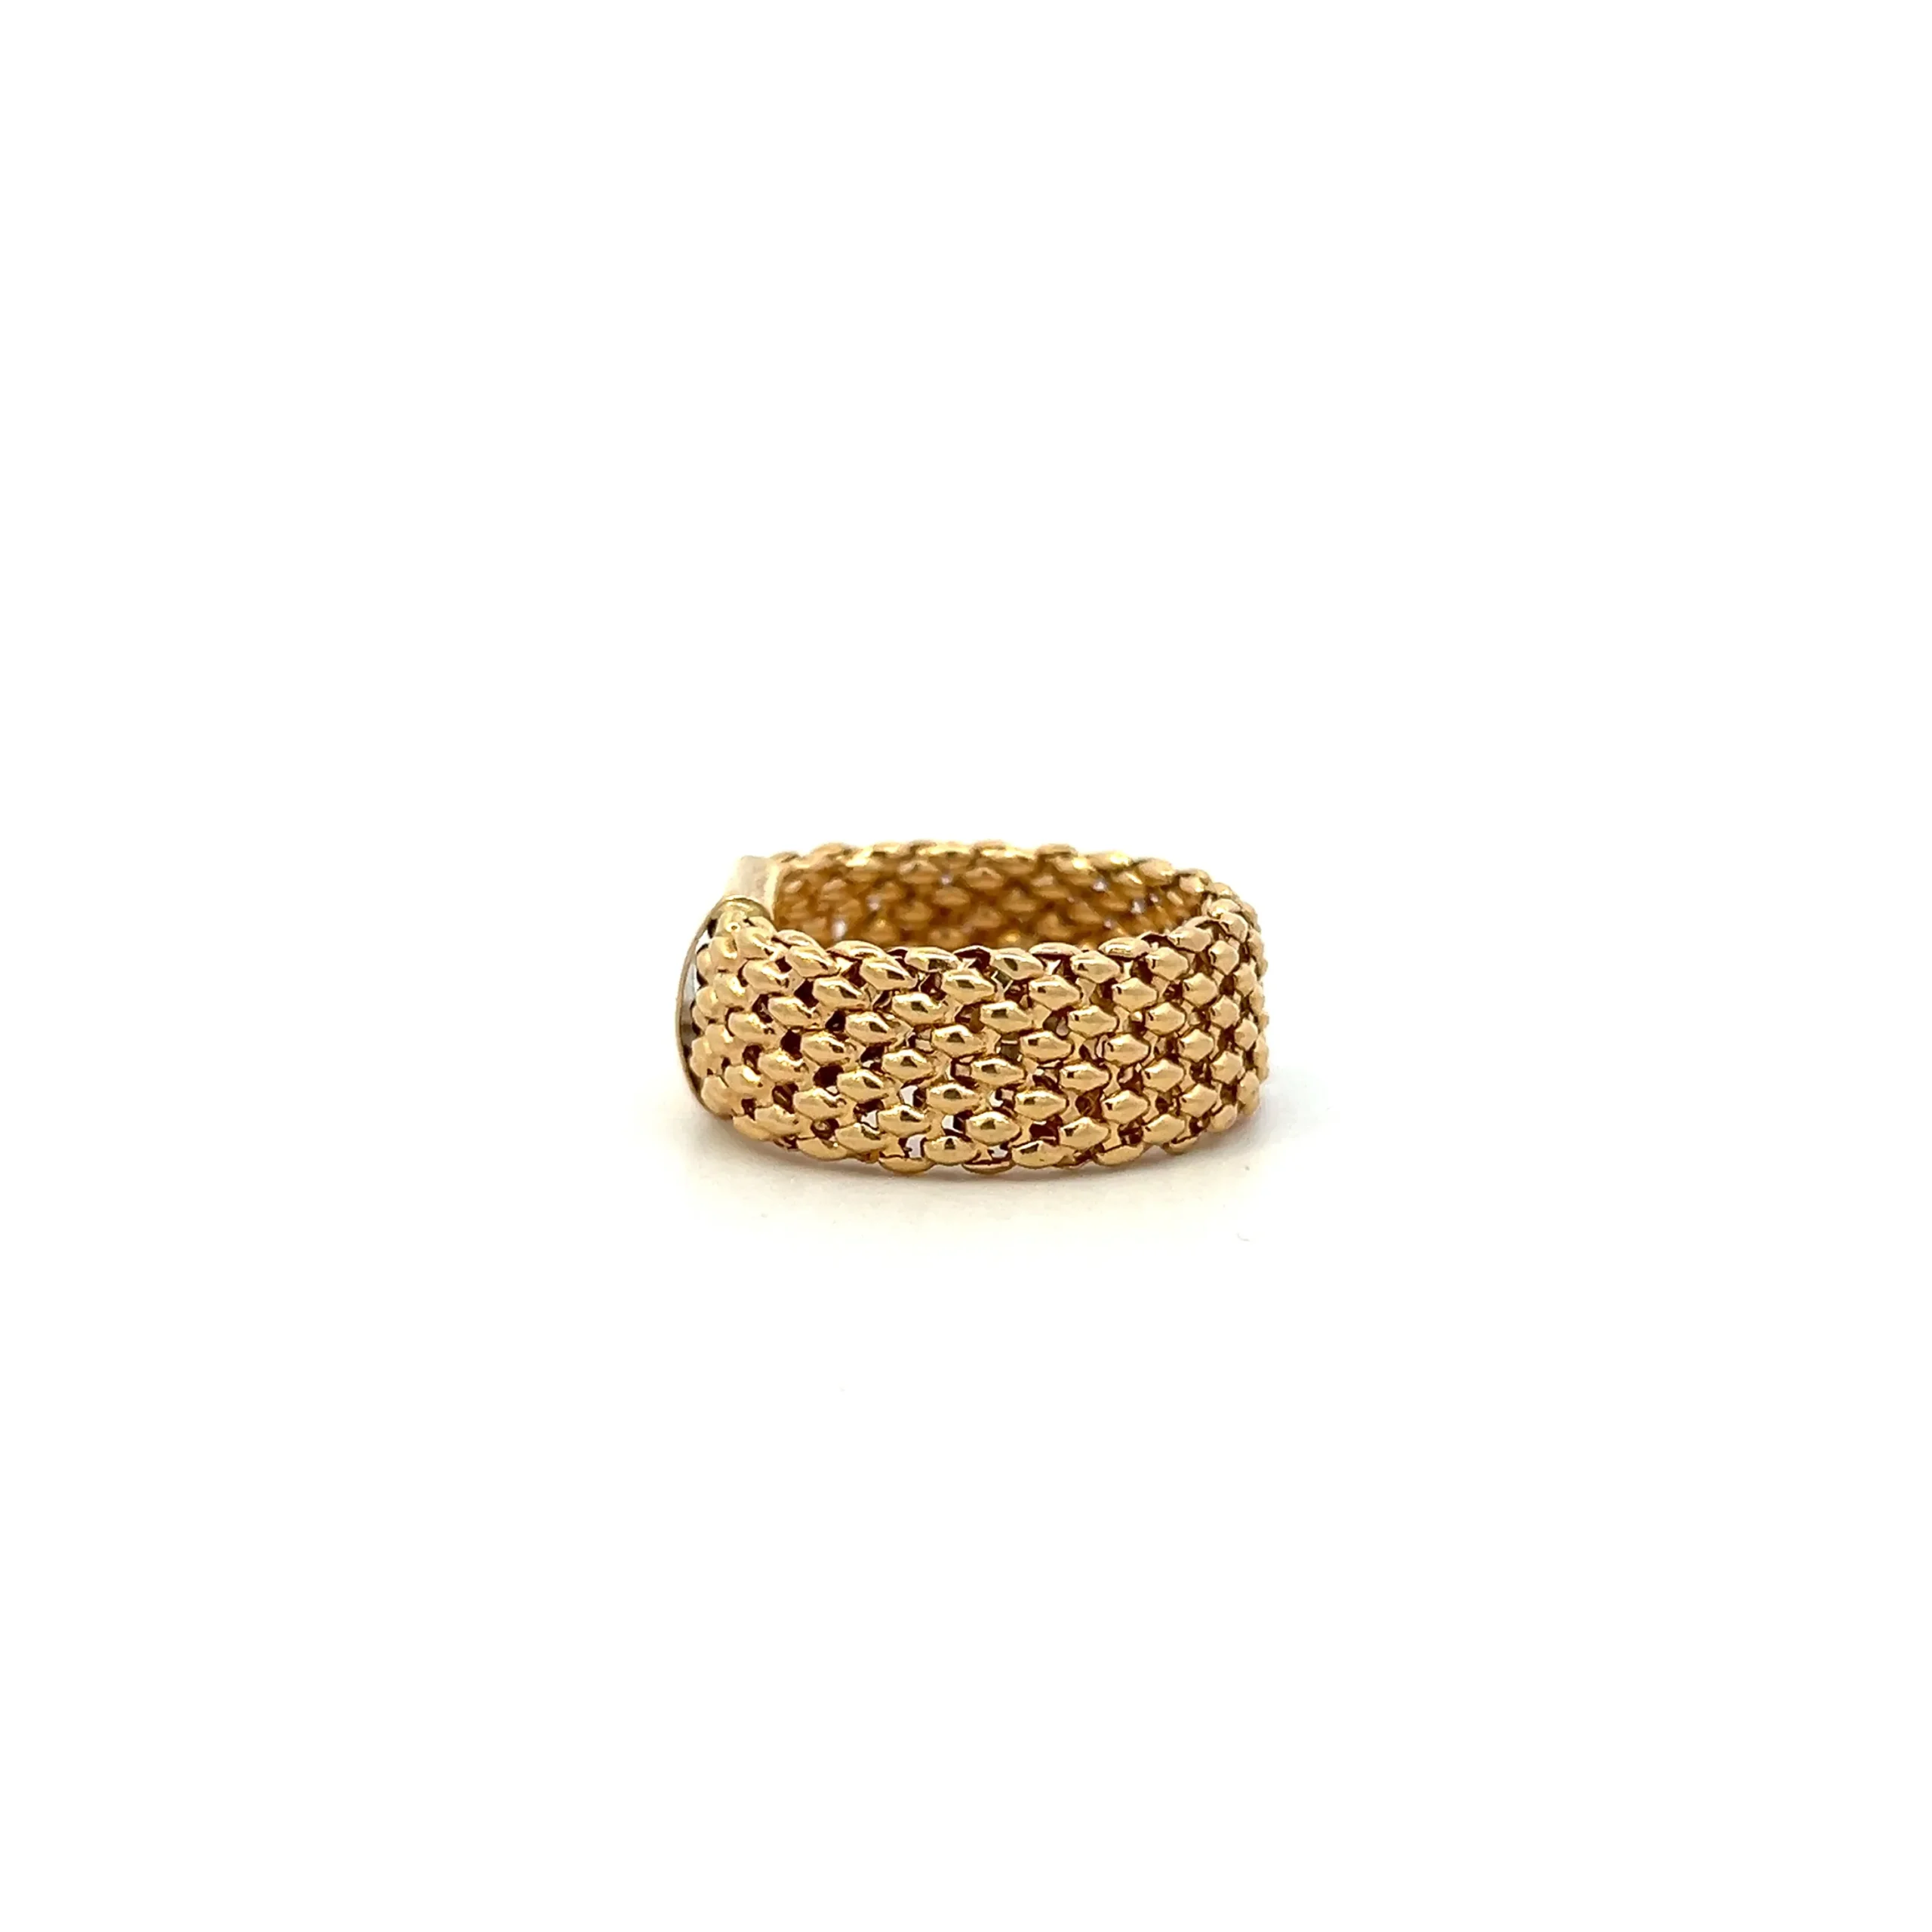 Estate 18K Gold Mesh Ring in yellow gold with an 8mm width and soft mesh design.